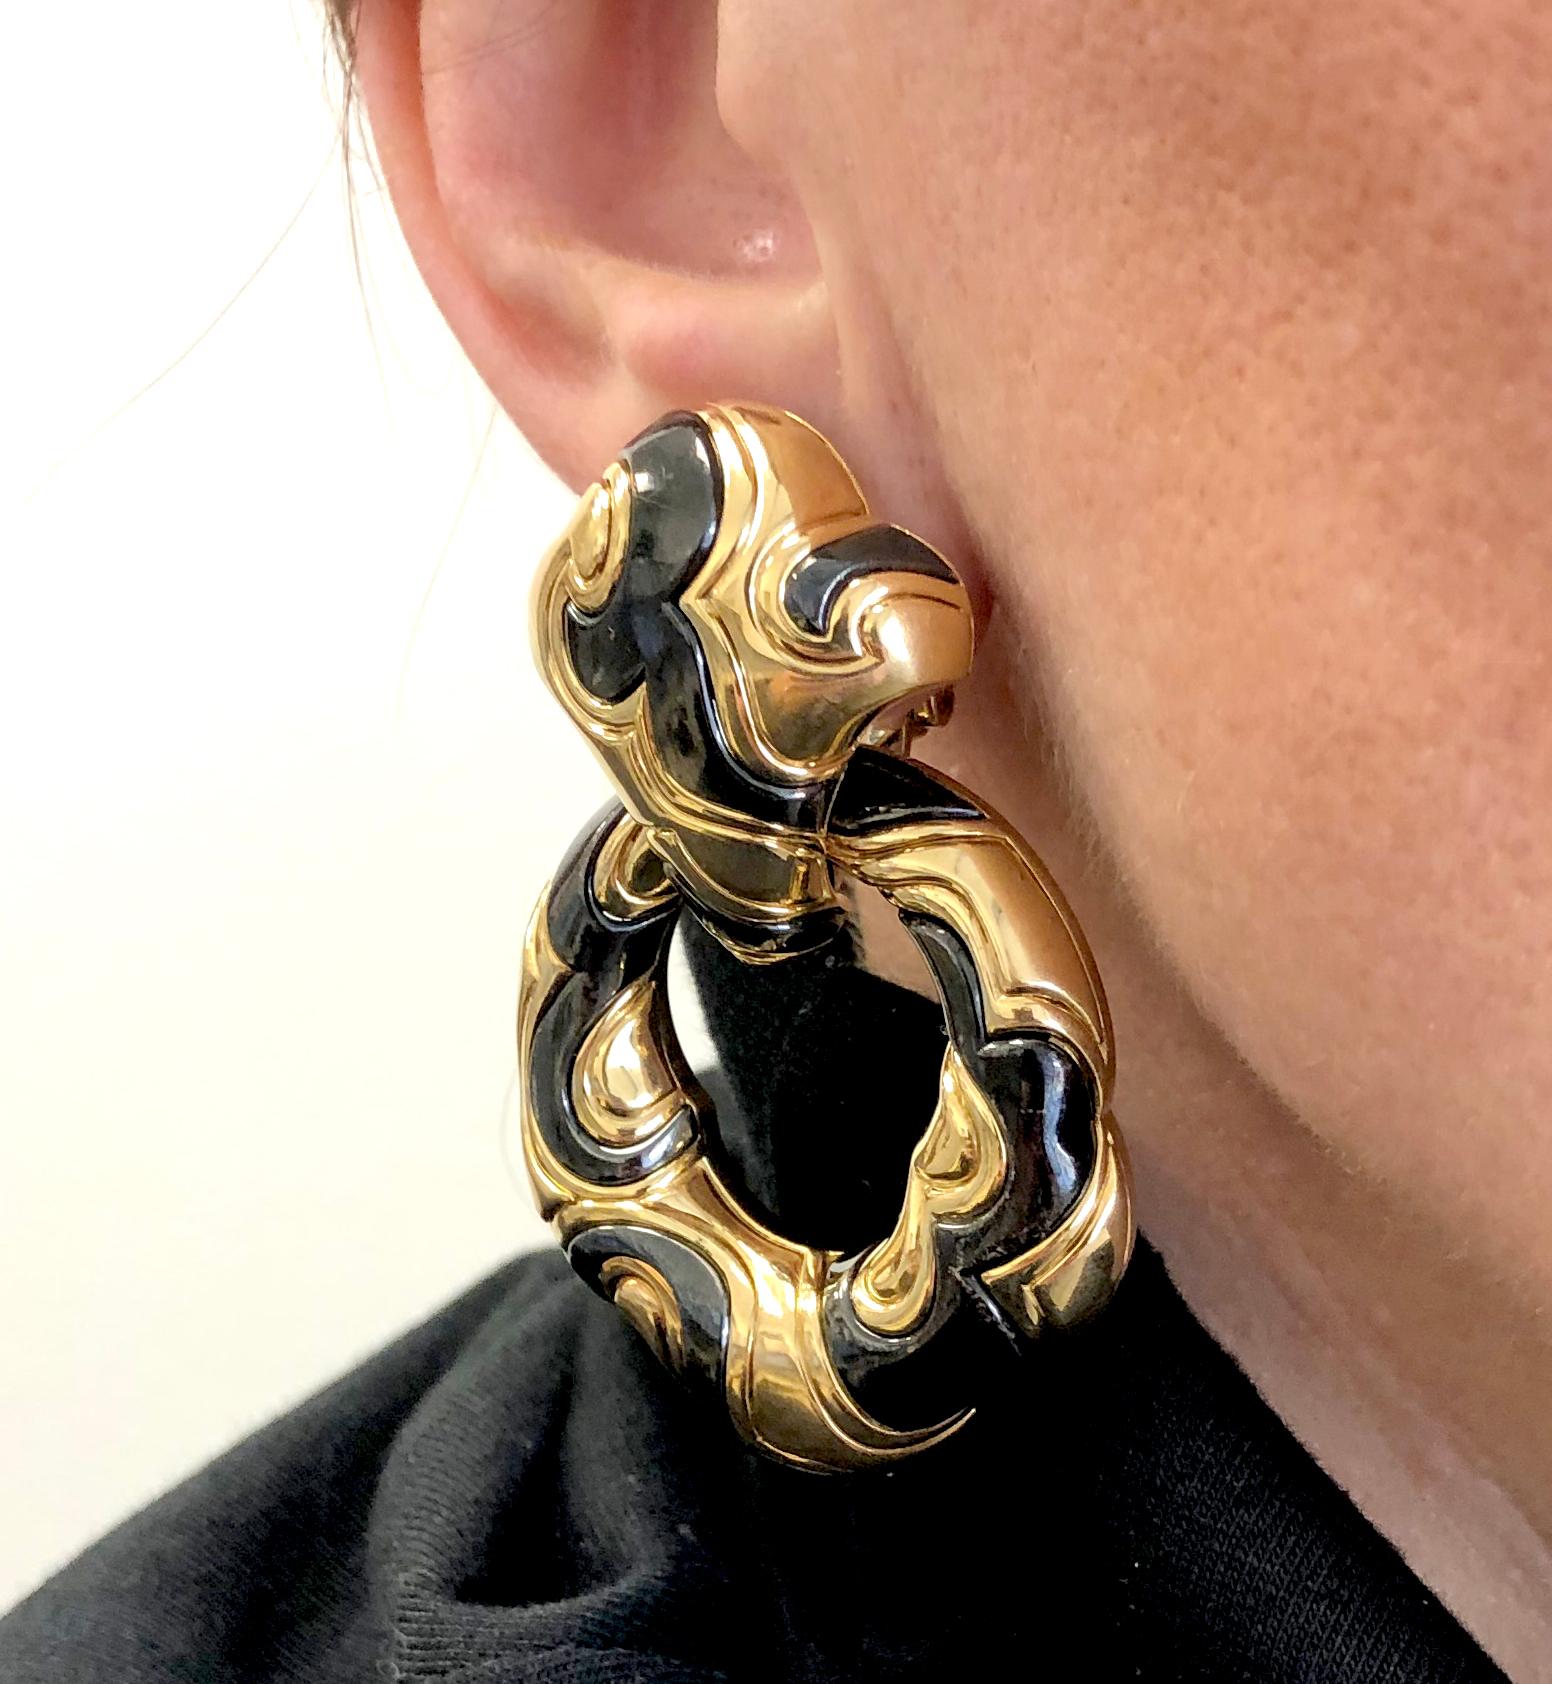 MARINA B Ken Detachable Hoop Earrings in Blackened 18k Yellow Gold.

An iconic and recognizable pair of Ken pattern on-the-ear clips by Marina B. The doorknocker-style pair can be adorned in two ways; the first as pictured with two pieces moving